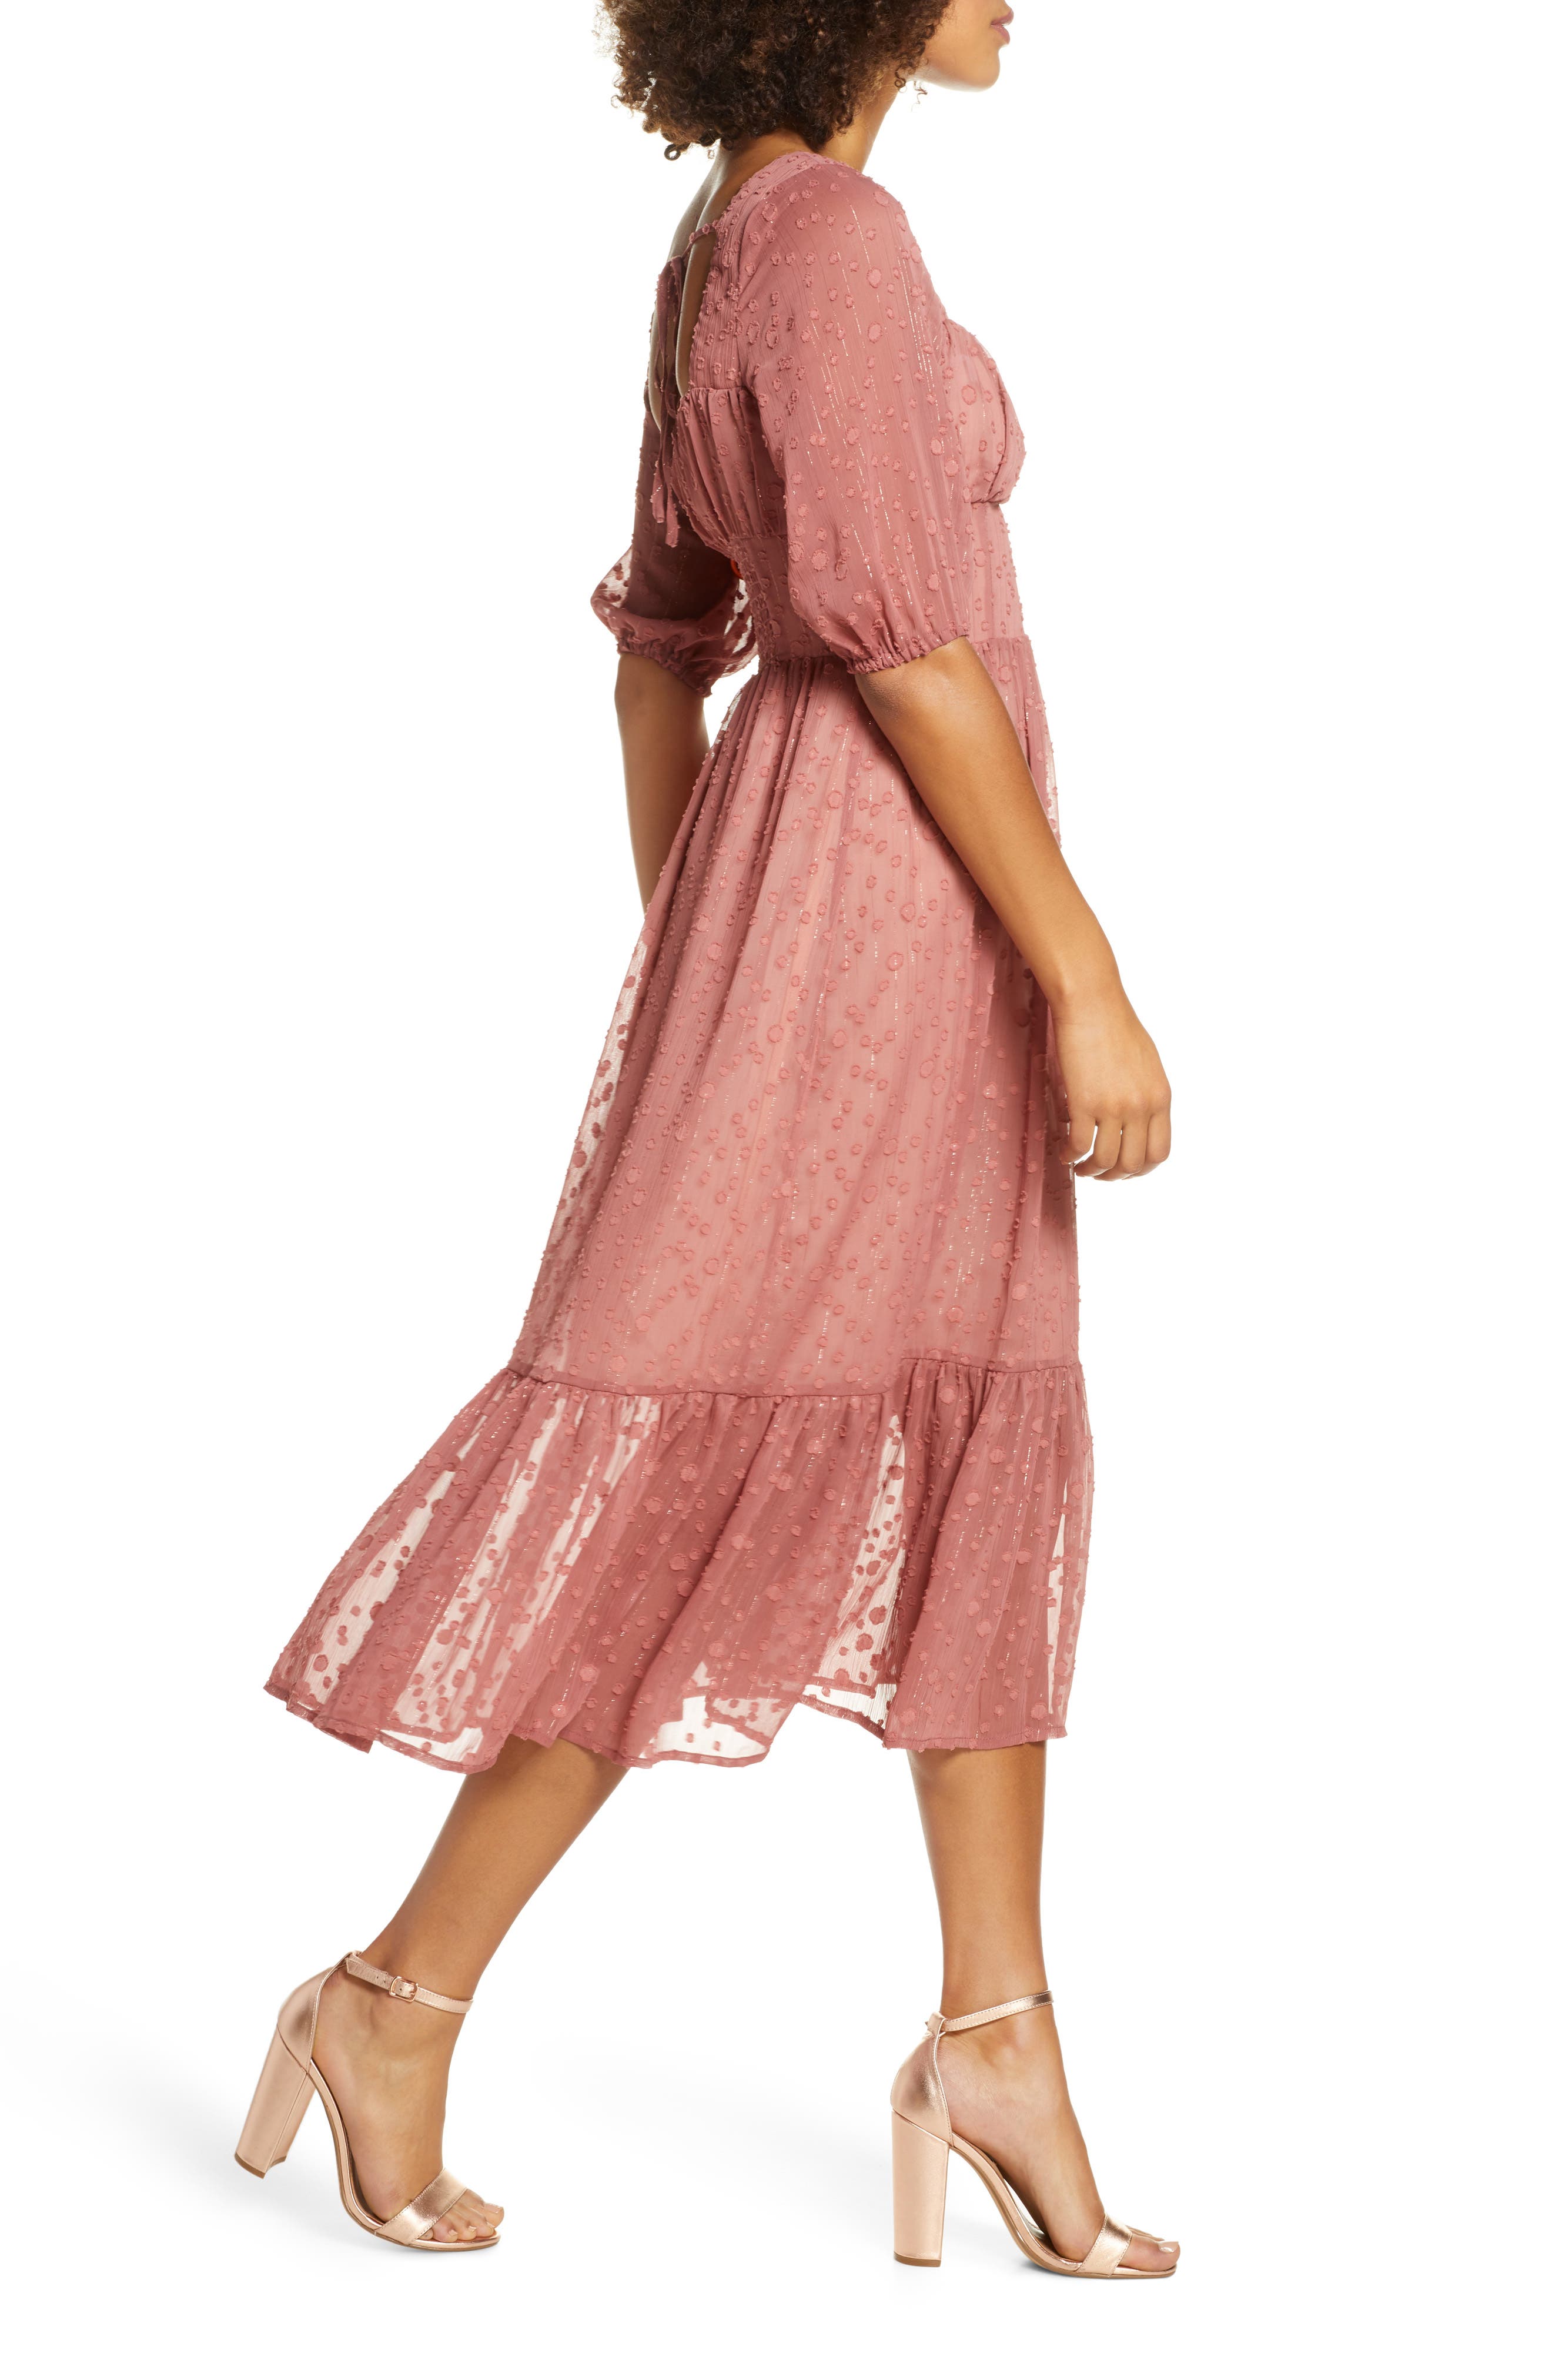 Get In on the Prairie Dress Trend This Winter If You Hate Wearing Tights